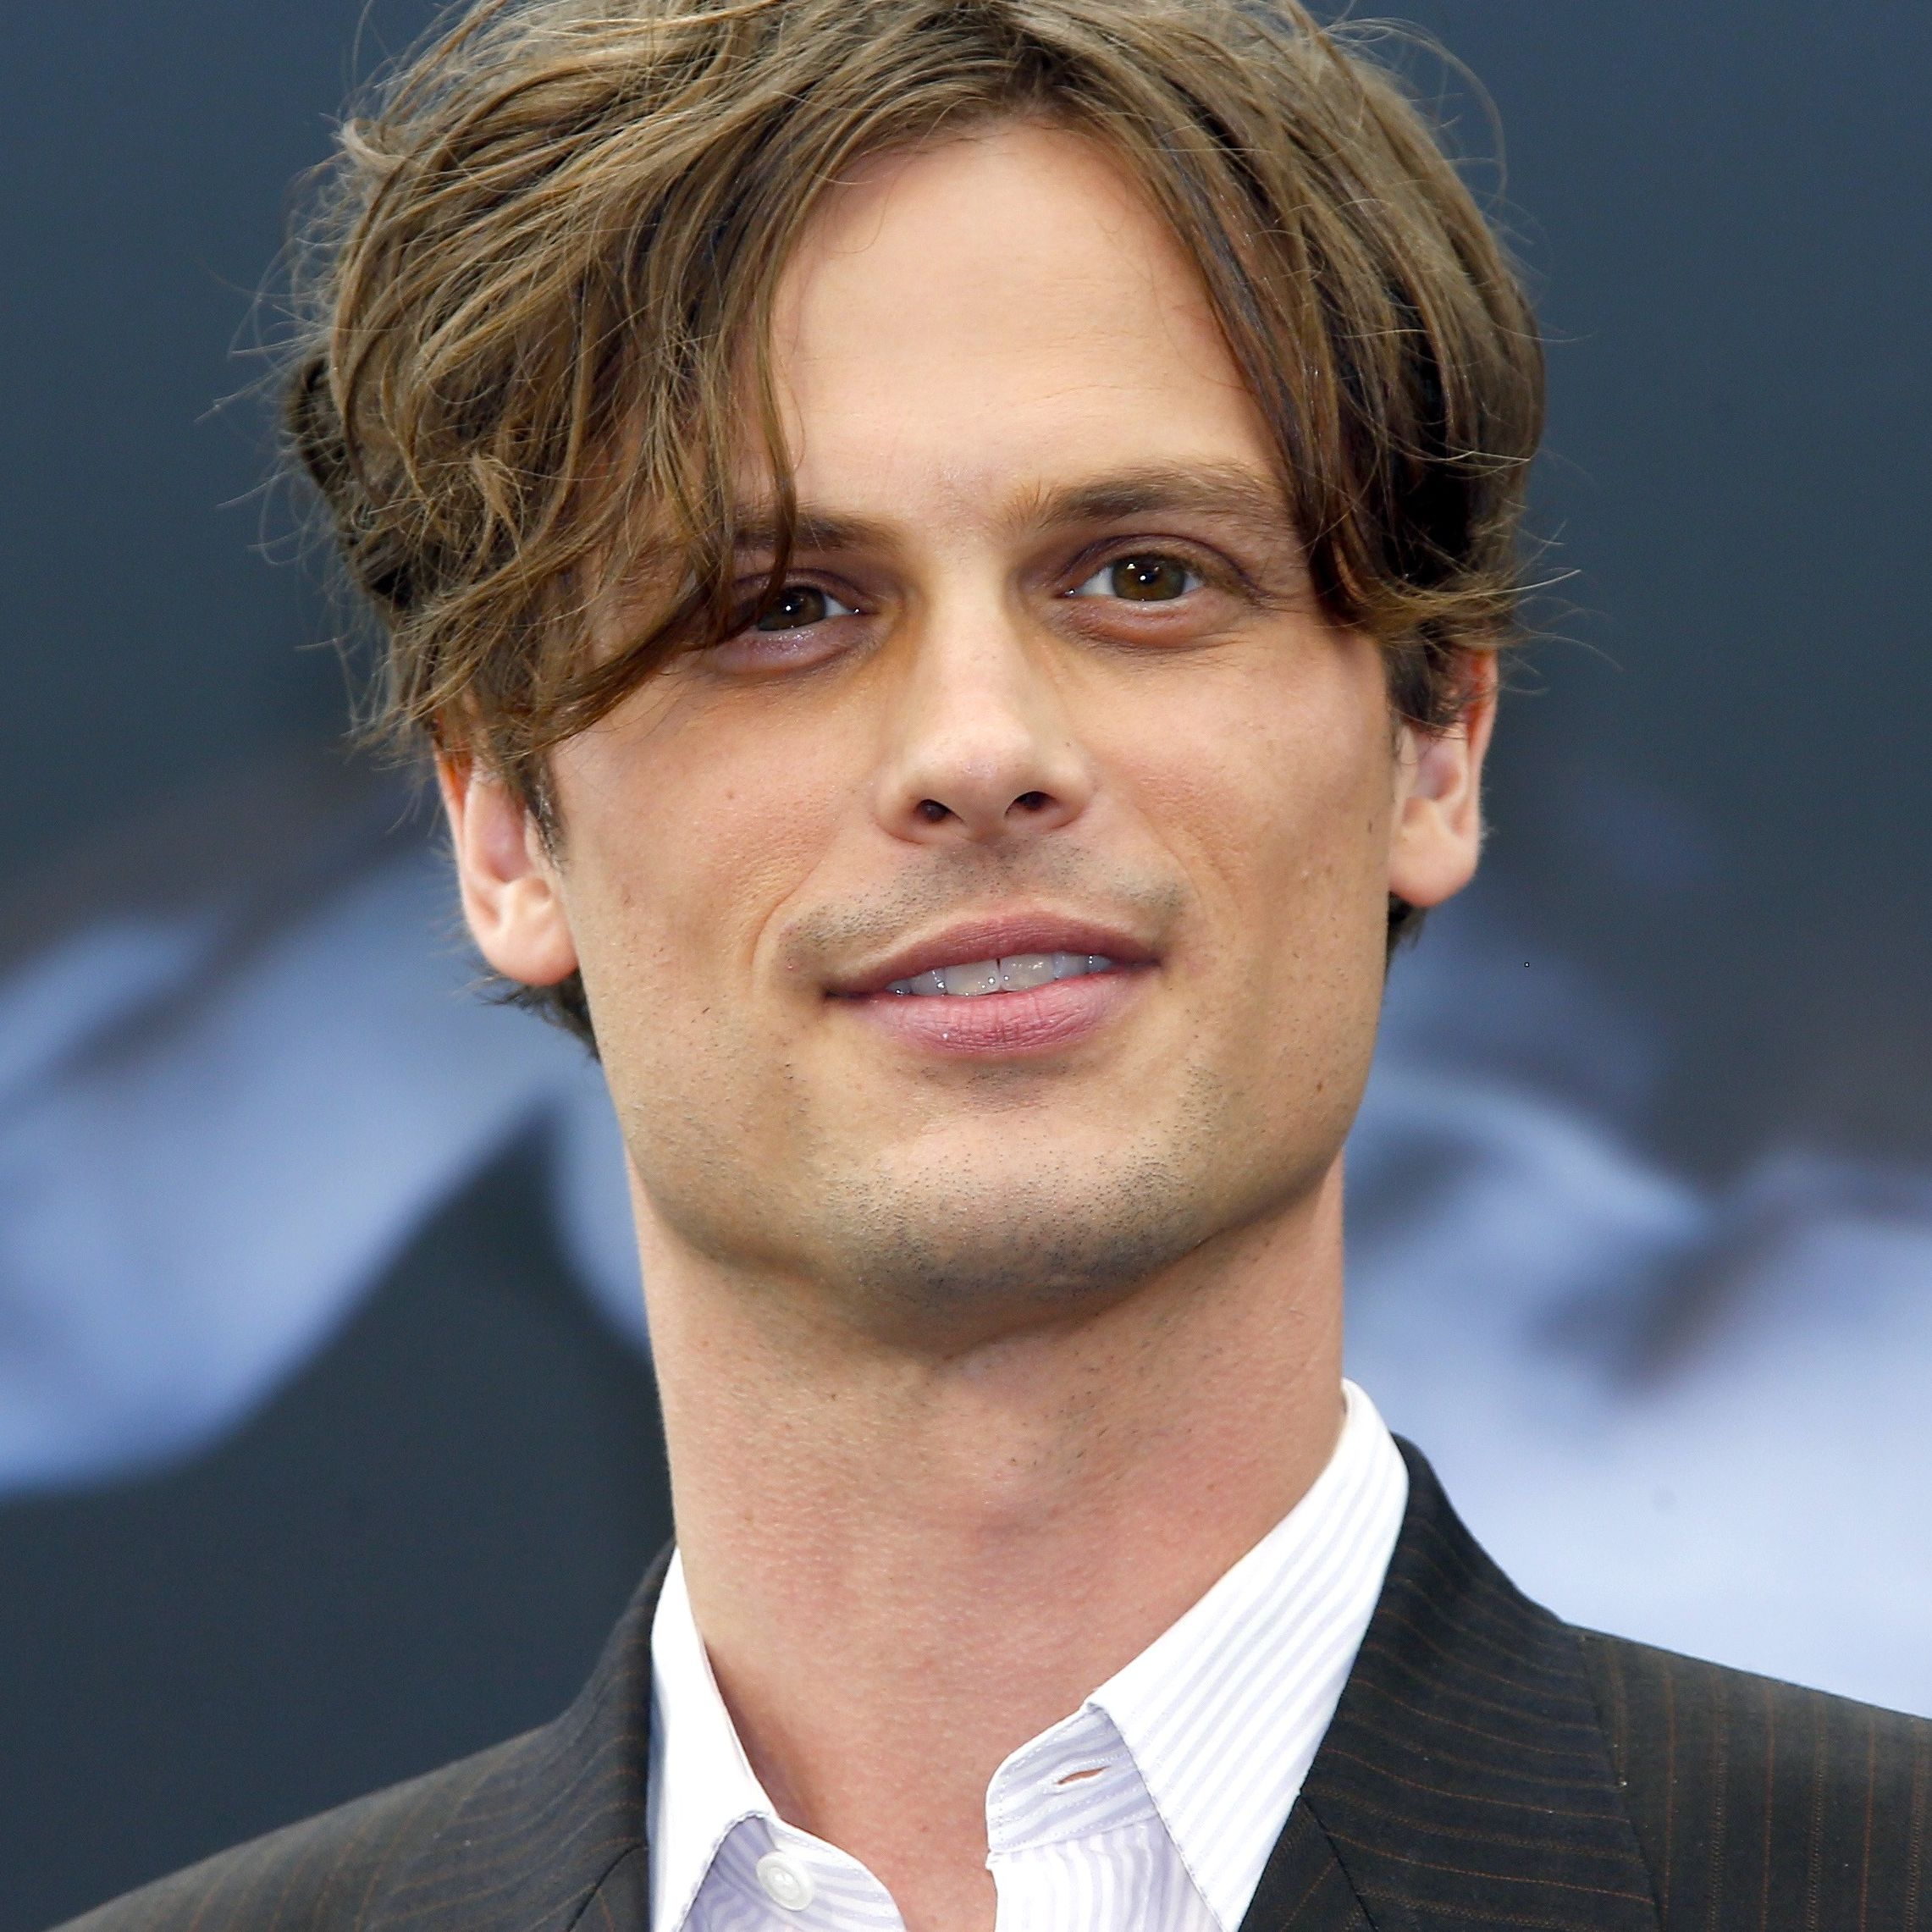 'Criminal Minds' Fans Are Going Off After Matthew Gray Gubler Posts Rare Personal Photos